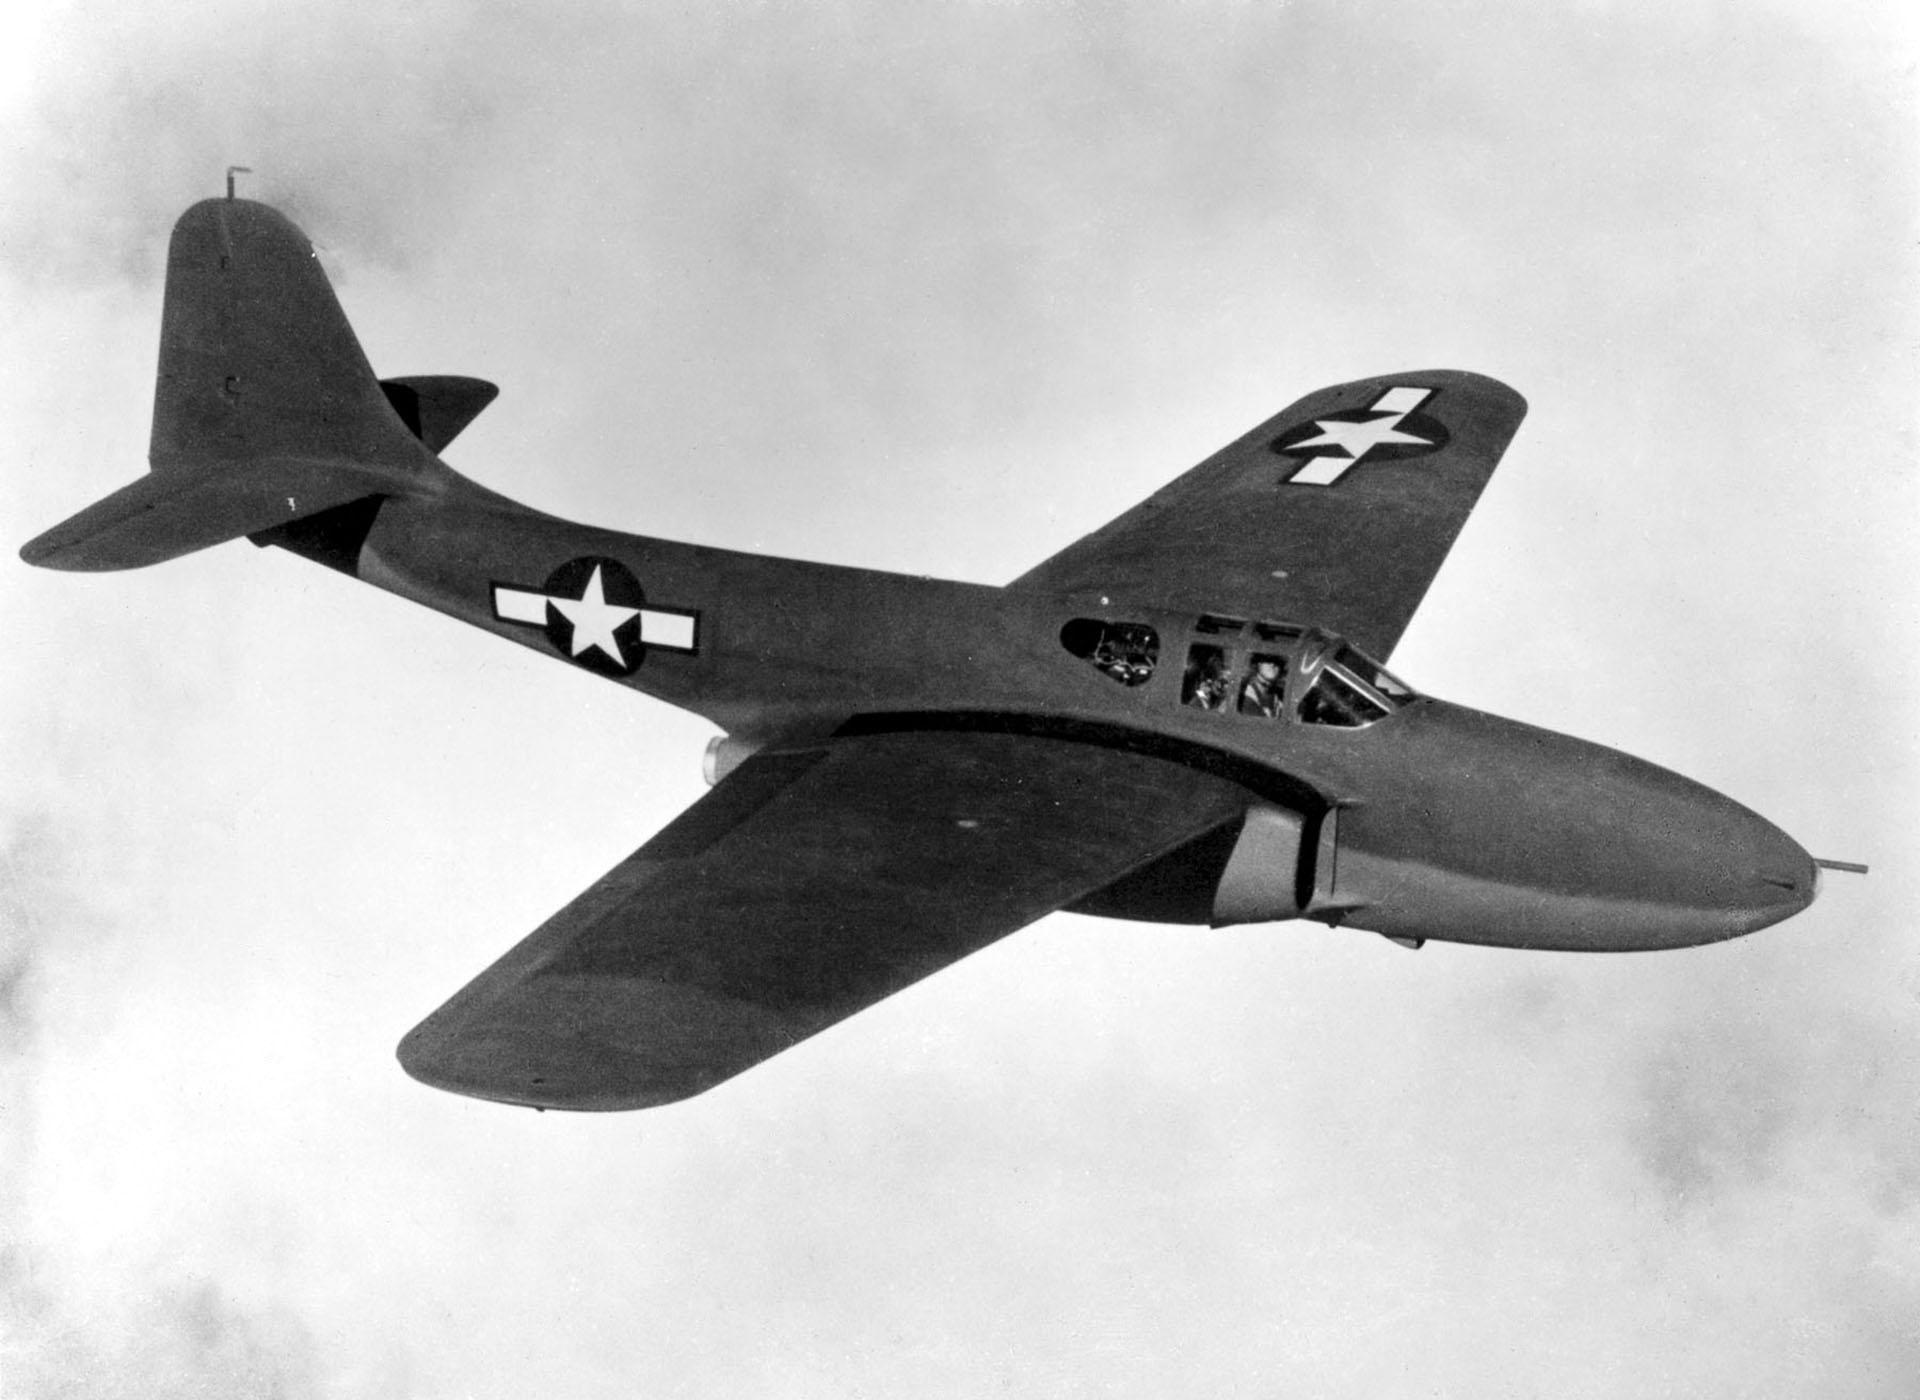 The YP-59. The first American Jet aircraft.